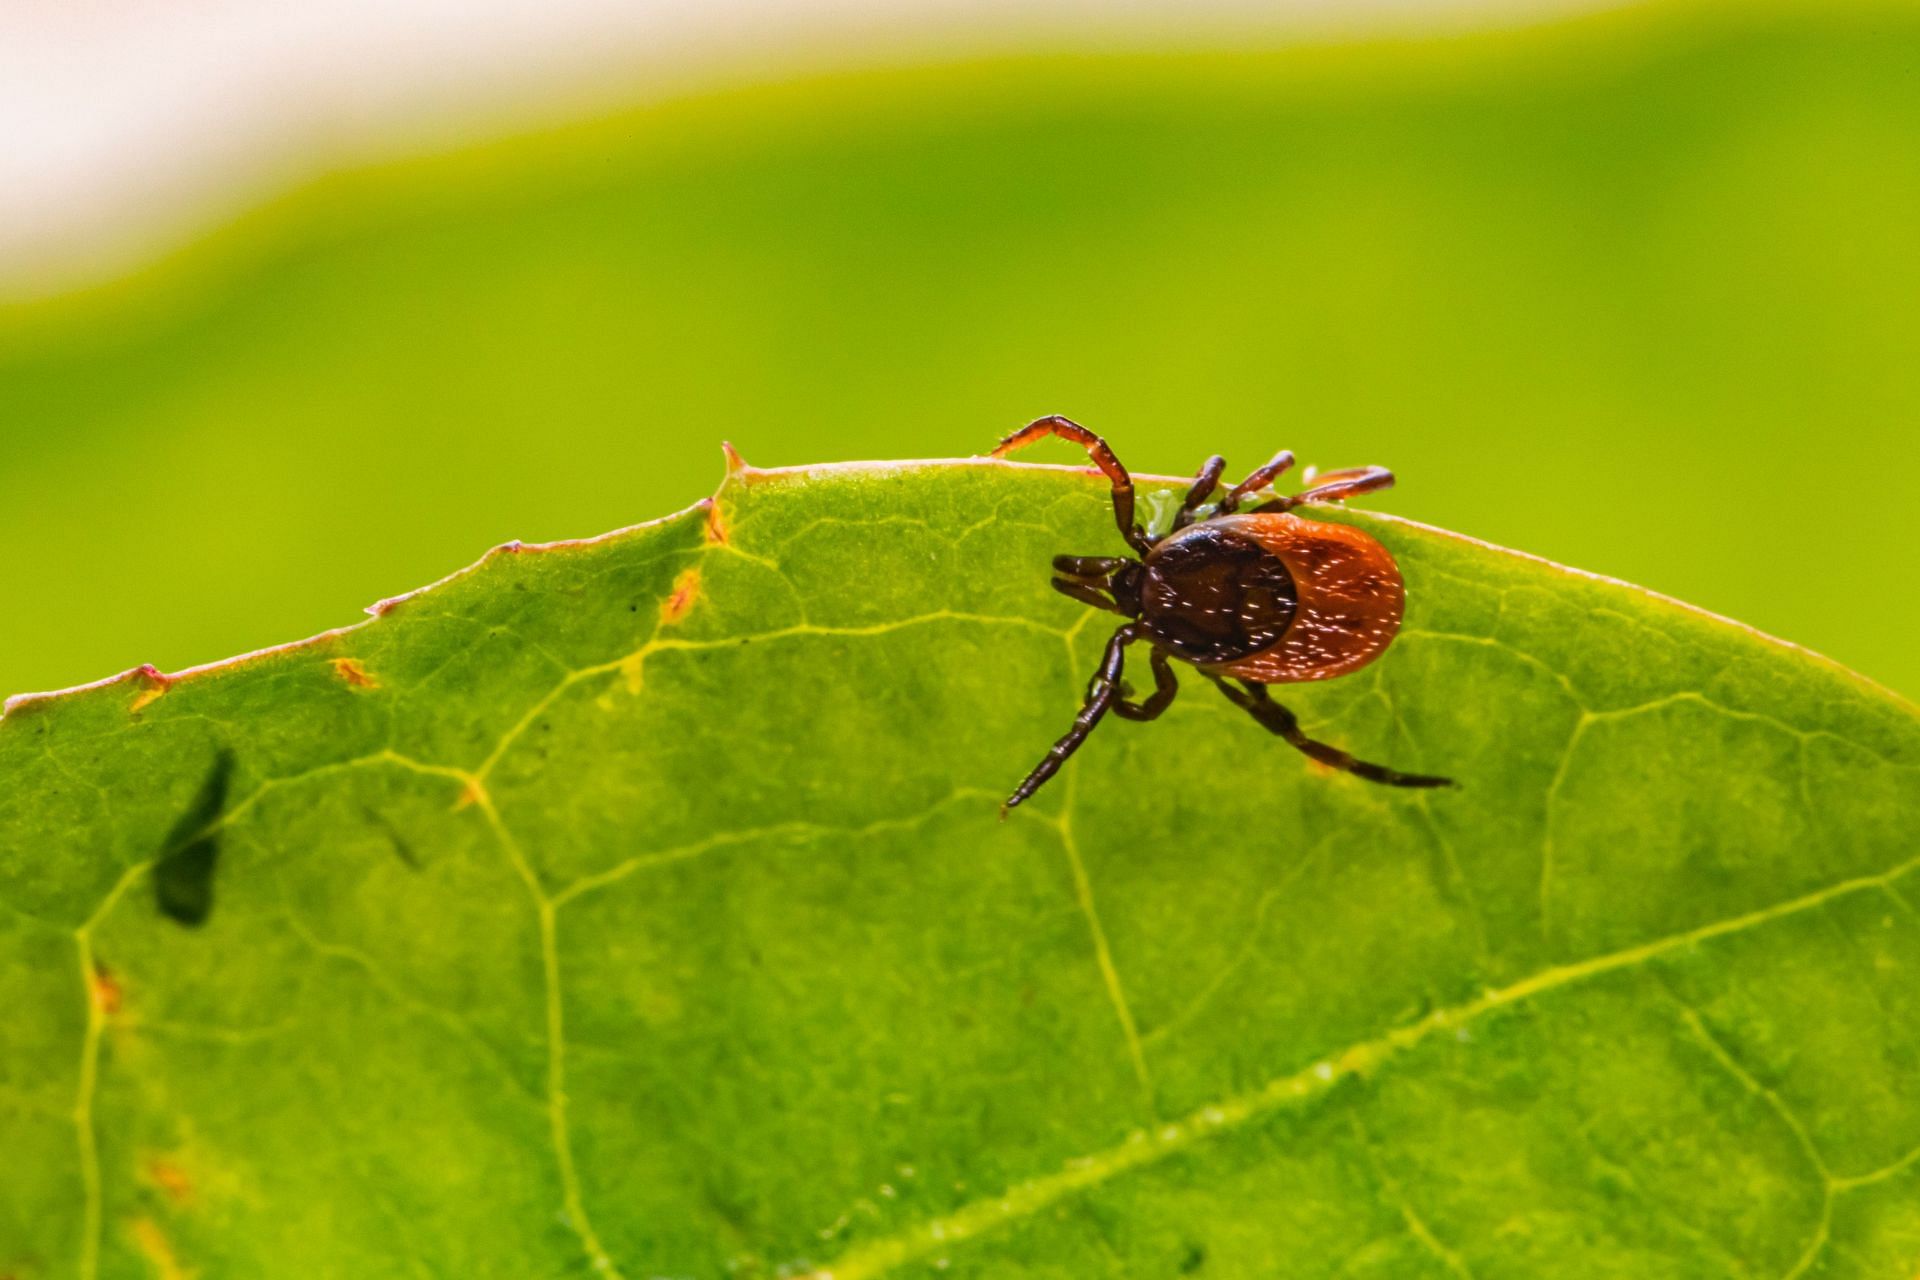 Rocky Mountain Spotted Fever can be associated with rashes (Image via Unsplash/Erik Karits)